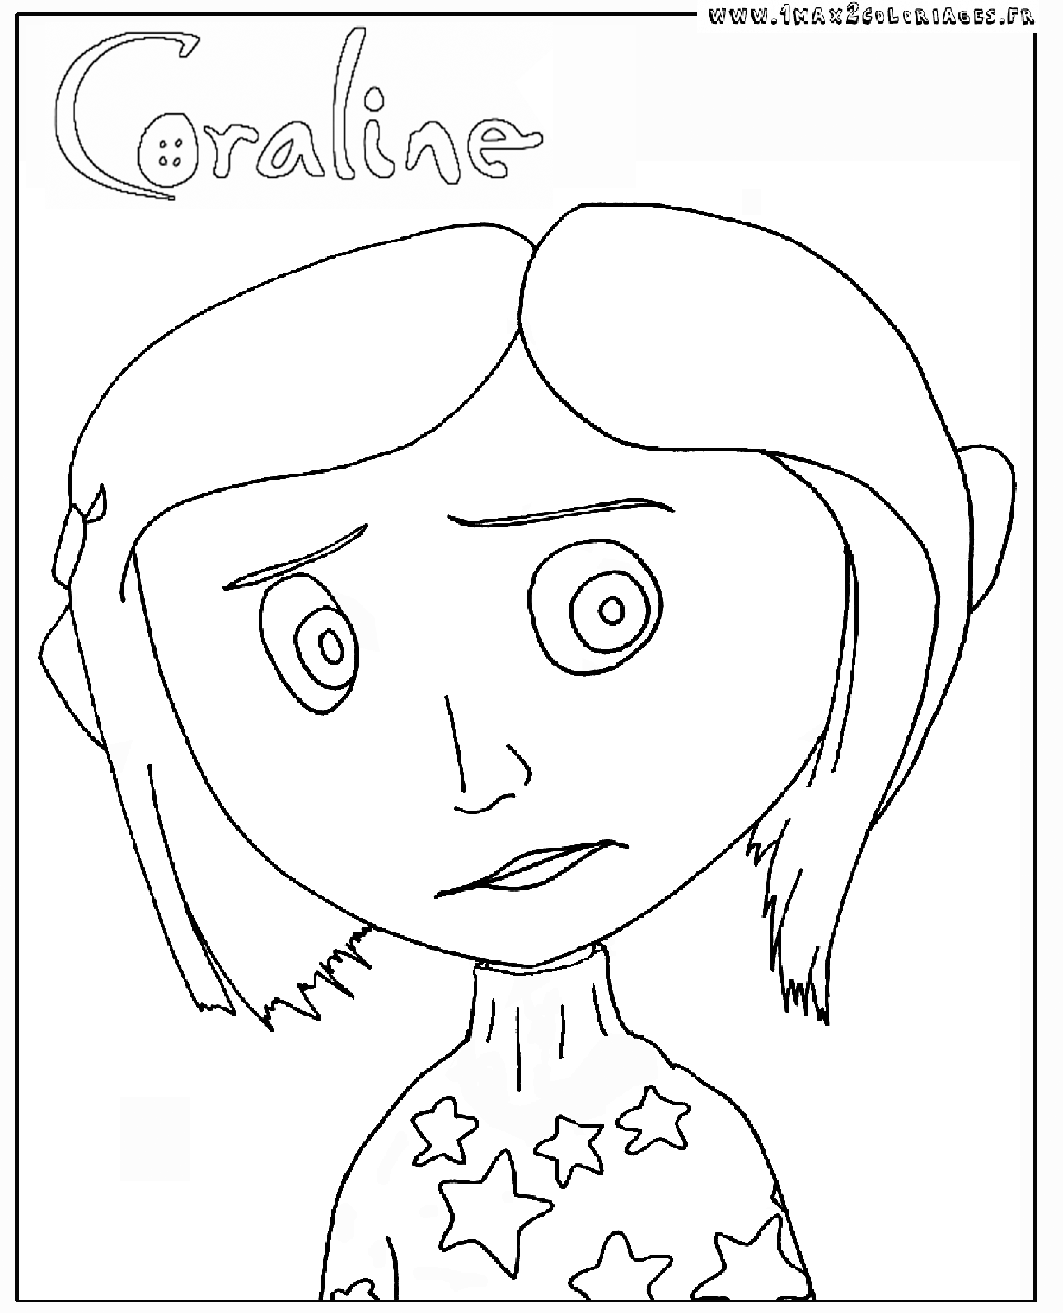 Coraline coloring pages to download and print for free